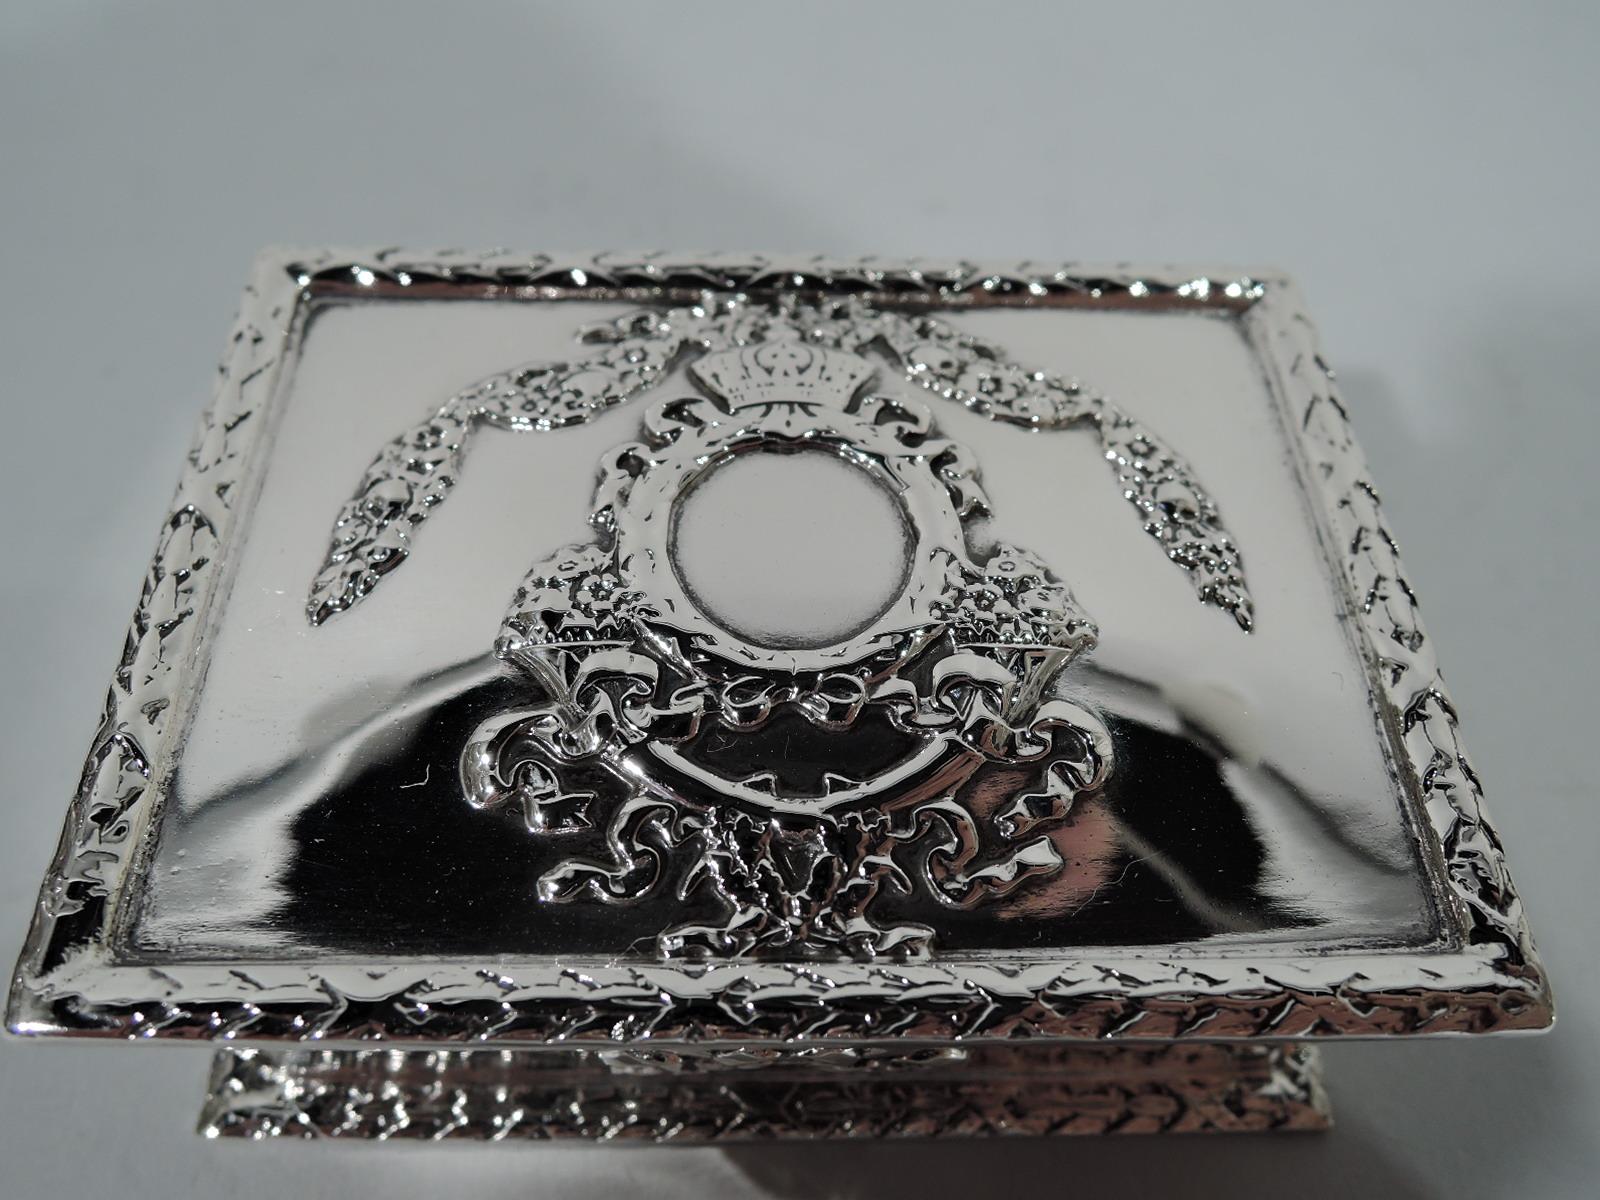 Fancy American sterling silver postage stamp box, ca 1890. Rectangular with straight and inset sides. Foot rim flat with imbricated leaf border. Cover hinged with same. Applied to cover top is round cartouche with regal crown between garland and